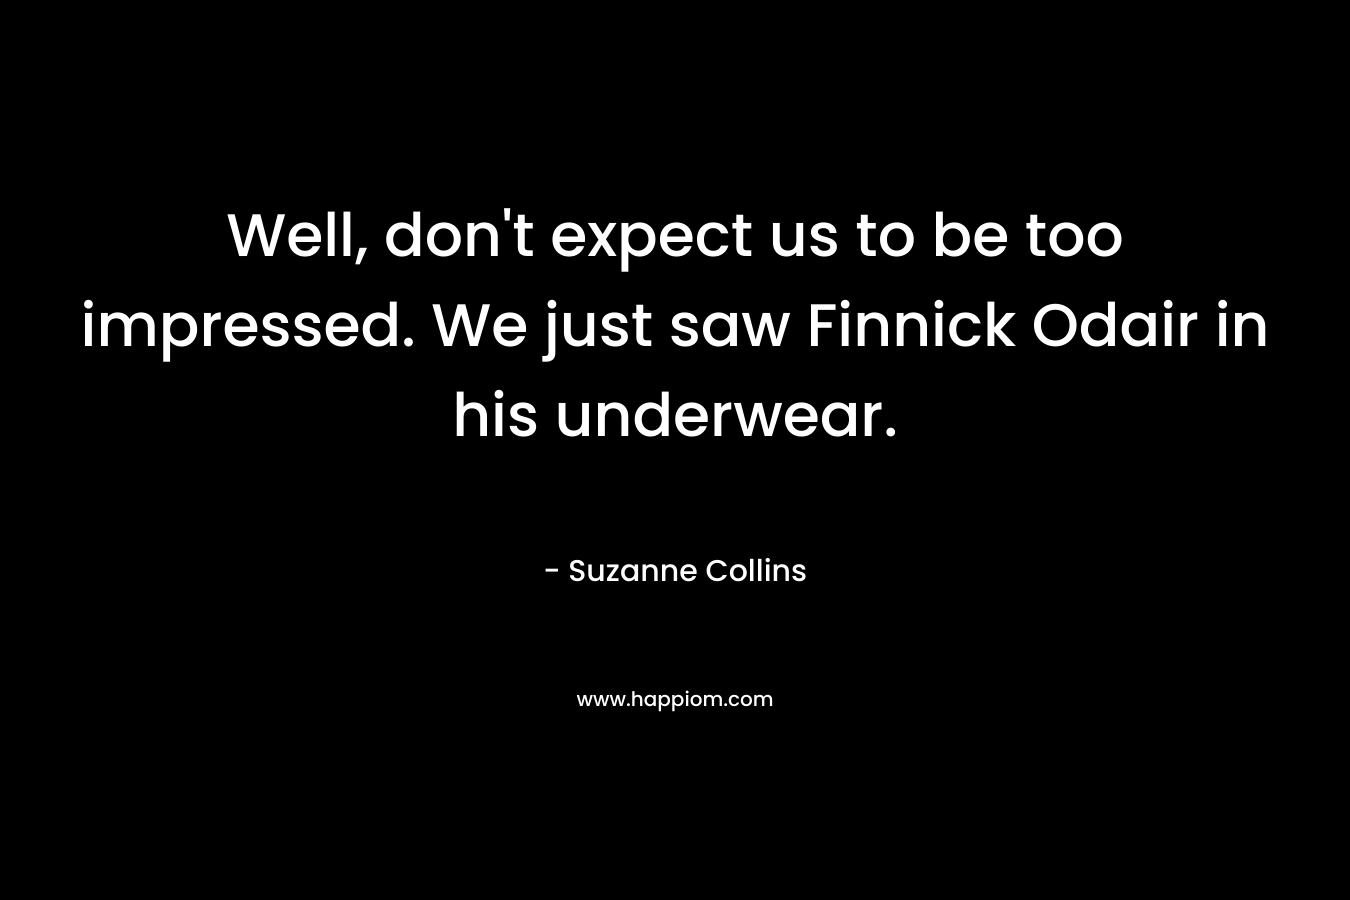 Well, don’t expect us to be too impressed. We just saw Finnick Odair in his underwear. – Suzanne Collins